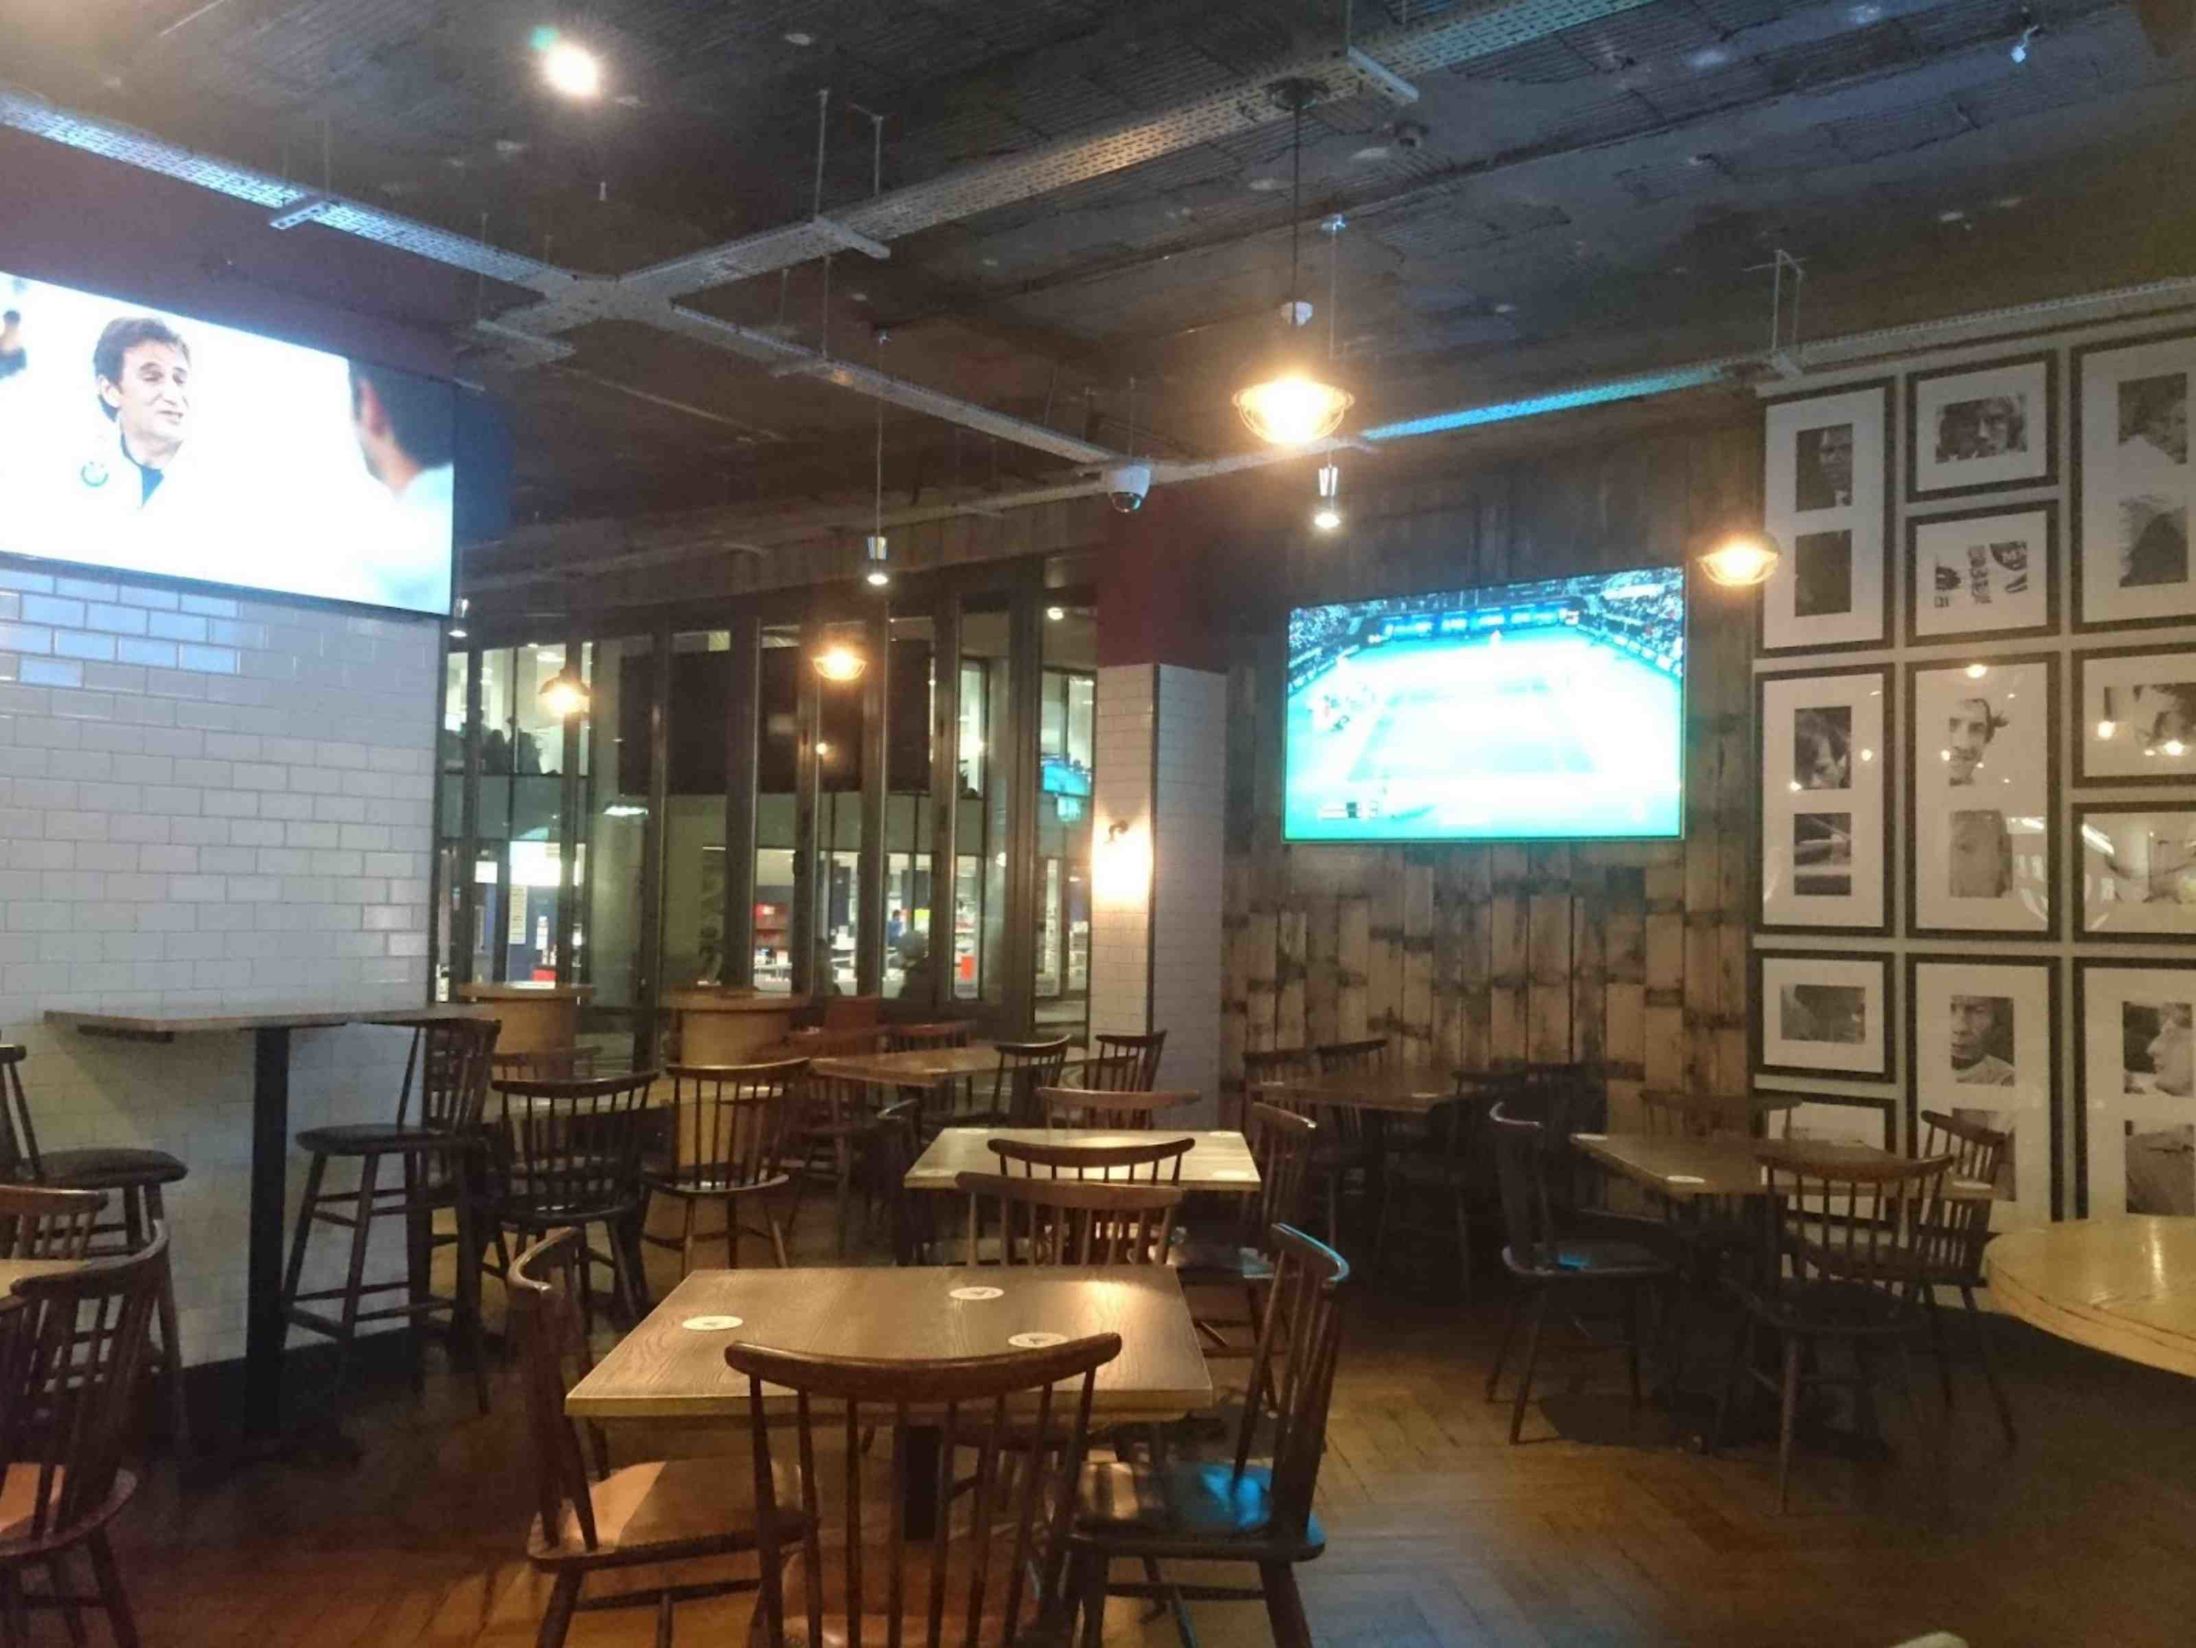 Directors Box - Best Sports Bars in Manchester